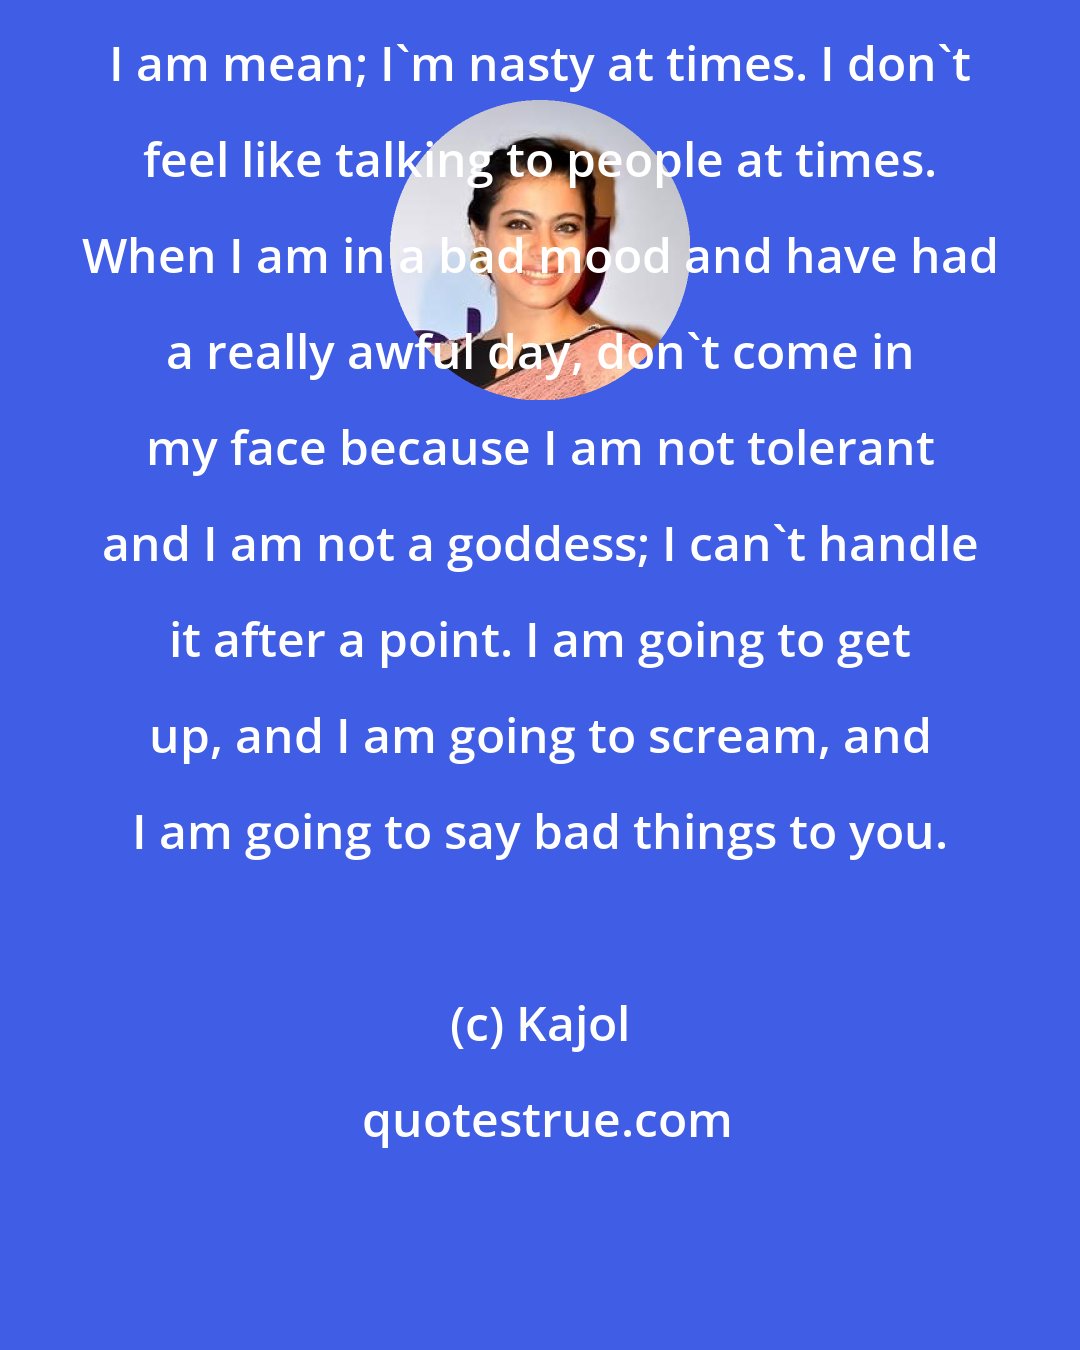 Kajol: I am mean; I'm nasty at times. I don't feel like talking to people at times. When I am in a bad mood and have had a really awful day, don't come in my face because I am not tolerant and I am not a goddess; I can't handle it after a point. I am going to get up, and I am going to scream, and I am going to say bad things to you.